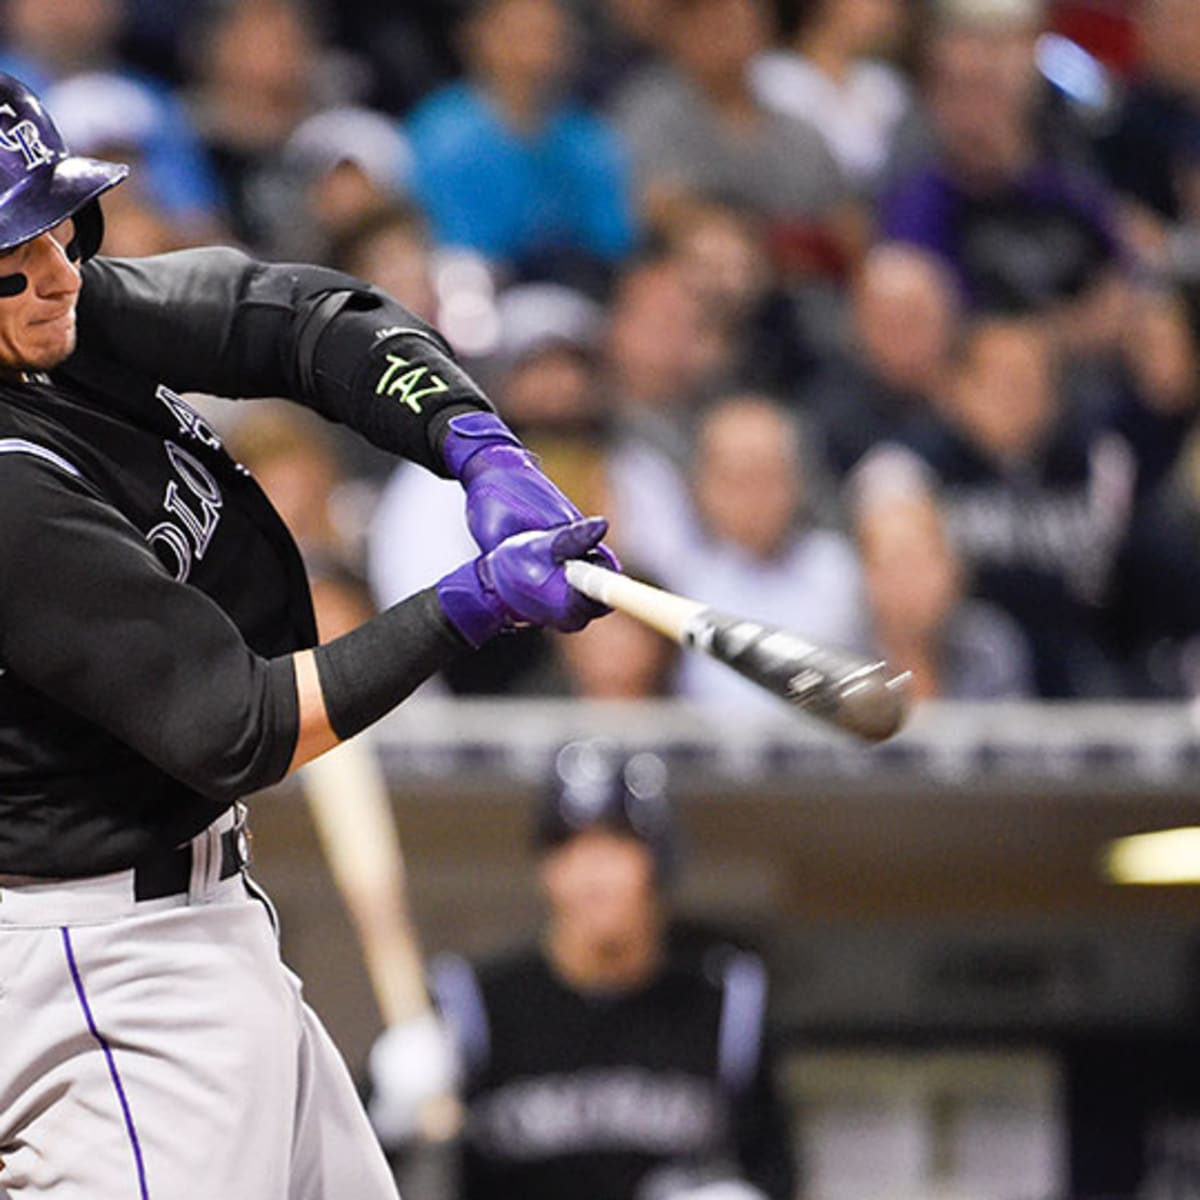 Rockie road: Sooner or later, Tulowitzki may ask for trade